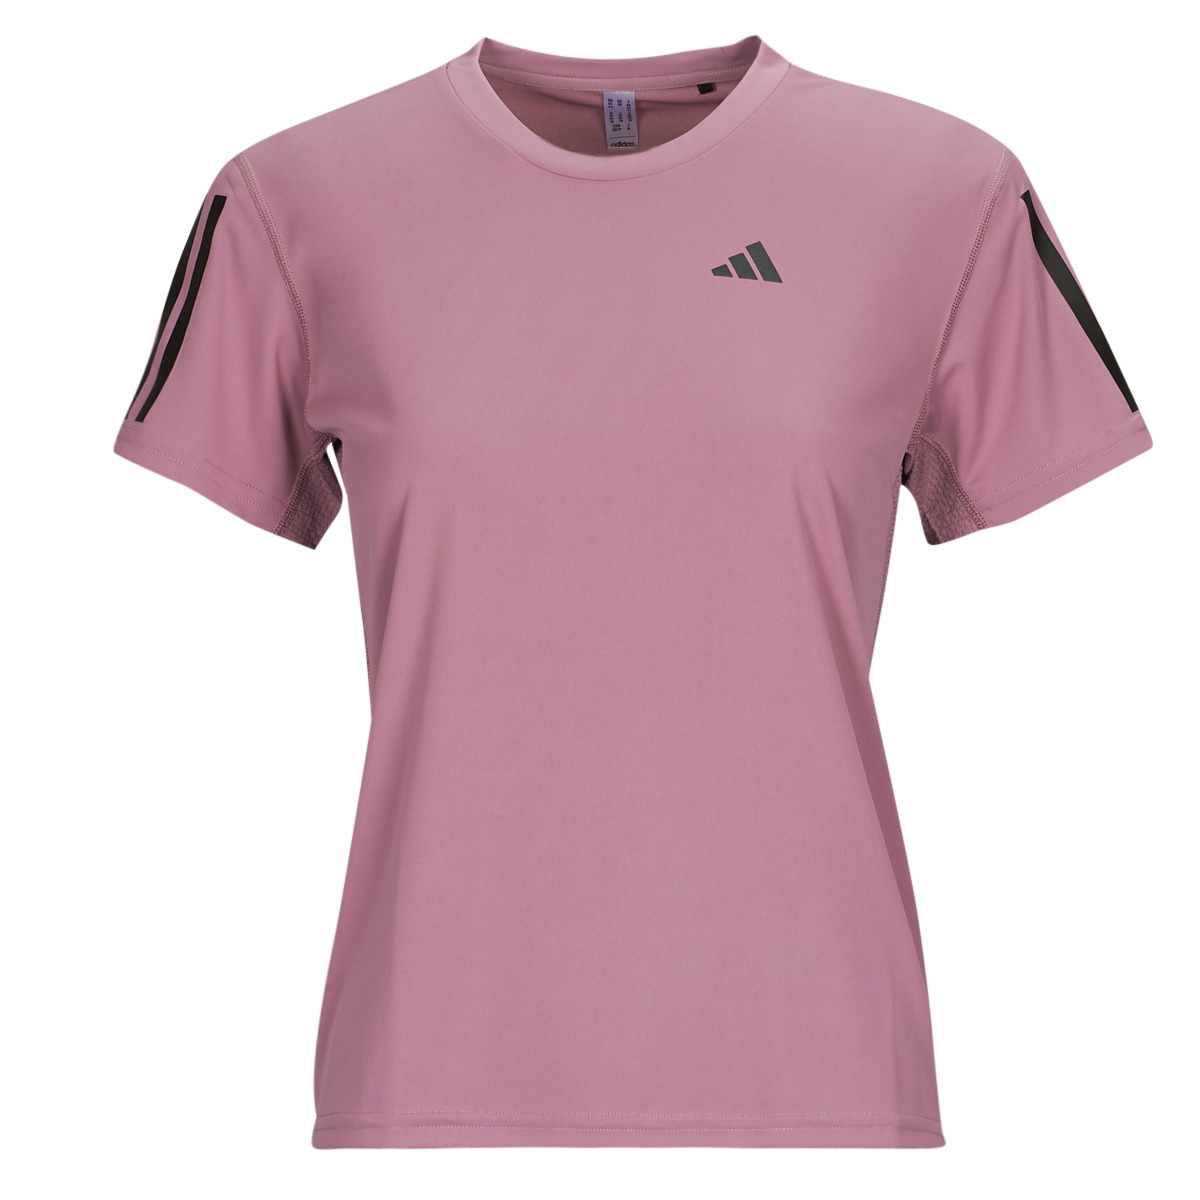 adidas Performance Violet OWN THE RUN TEE mWGx59dX